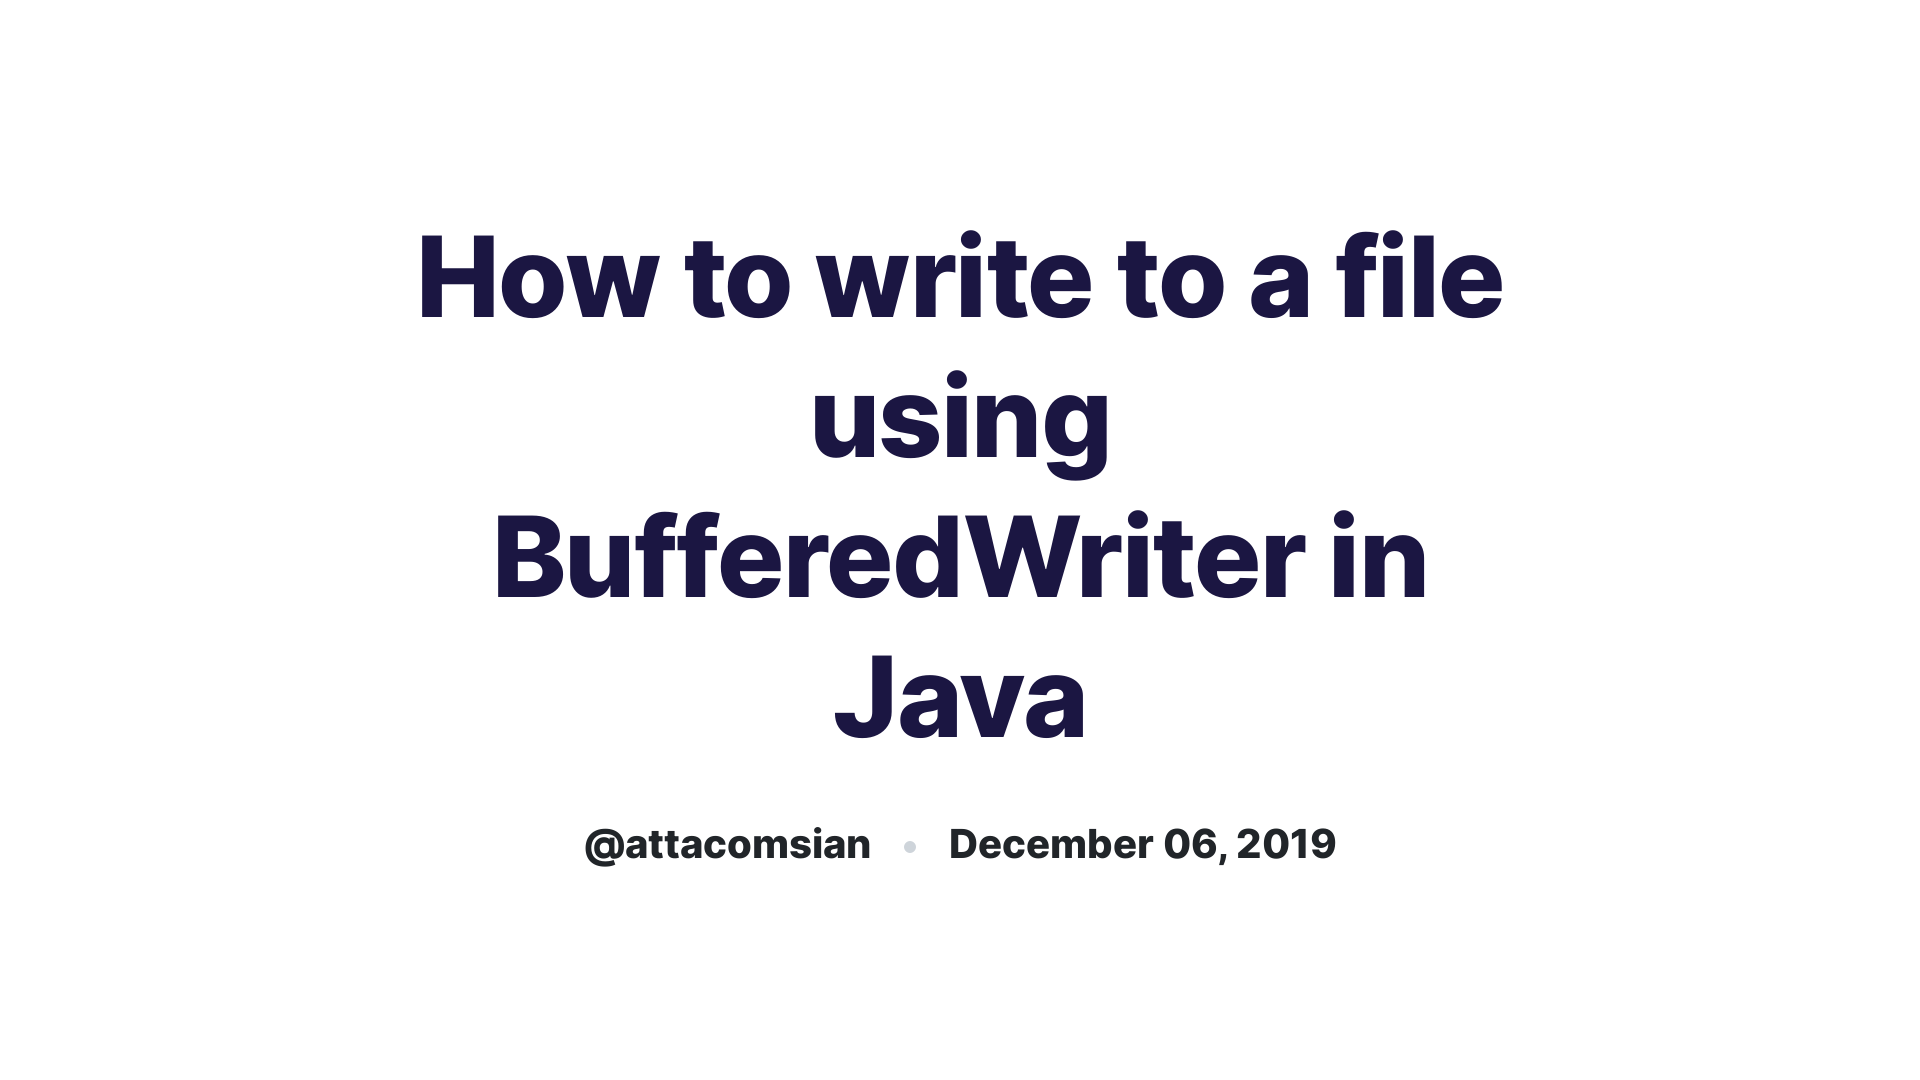 How to write to a file using BufferedWriter in Java